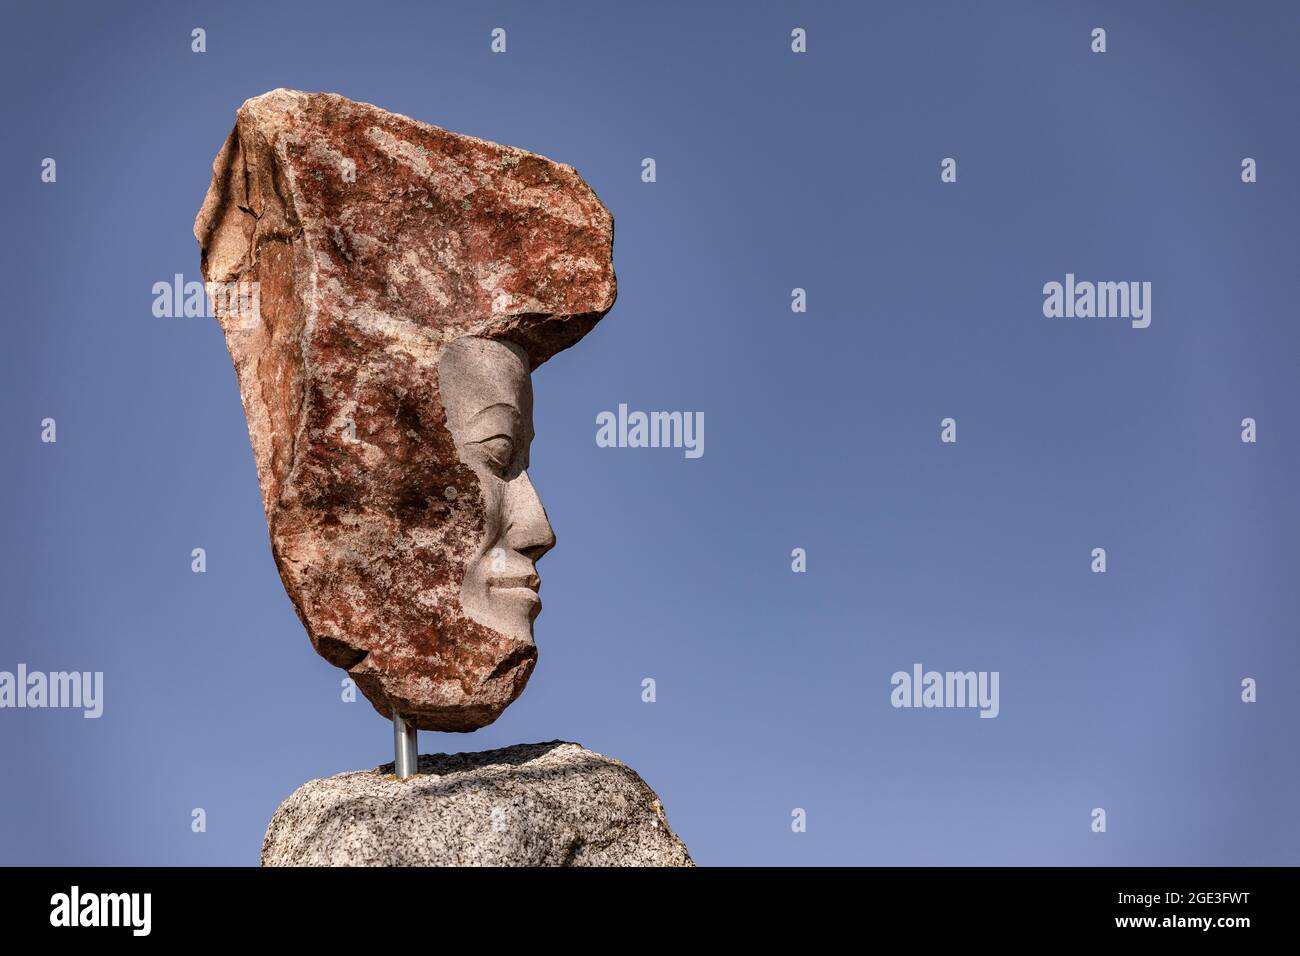 Striking granite stone statue against a blue sky in the sunlight Stock Photo